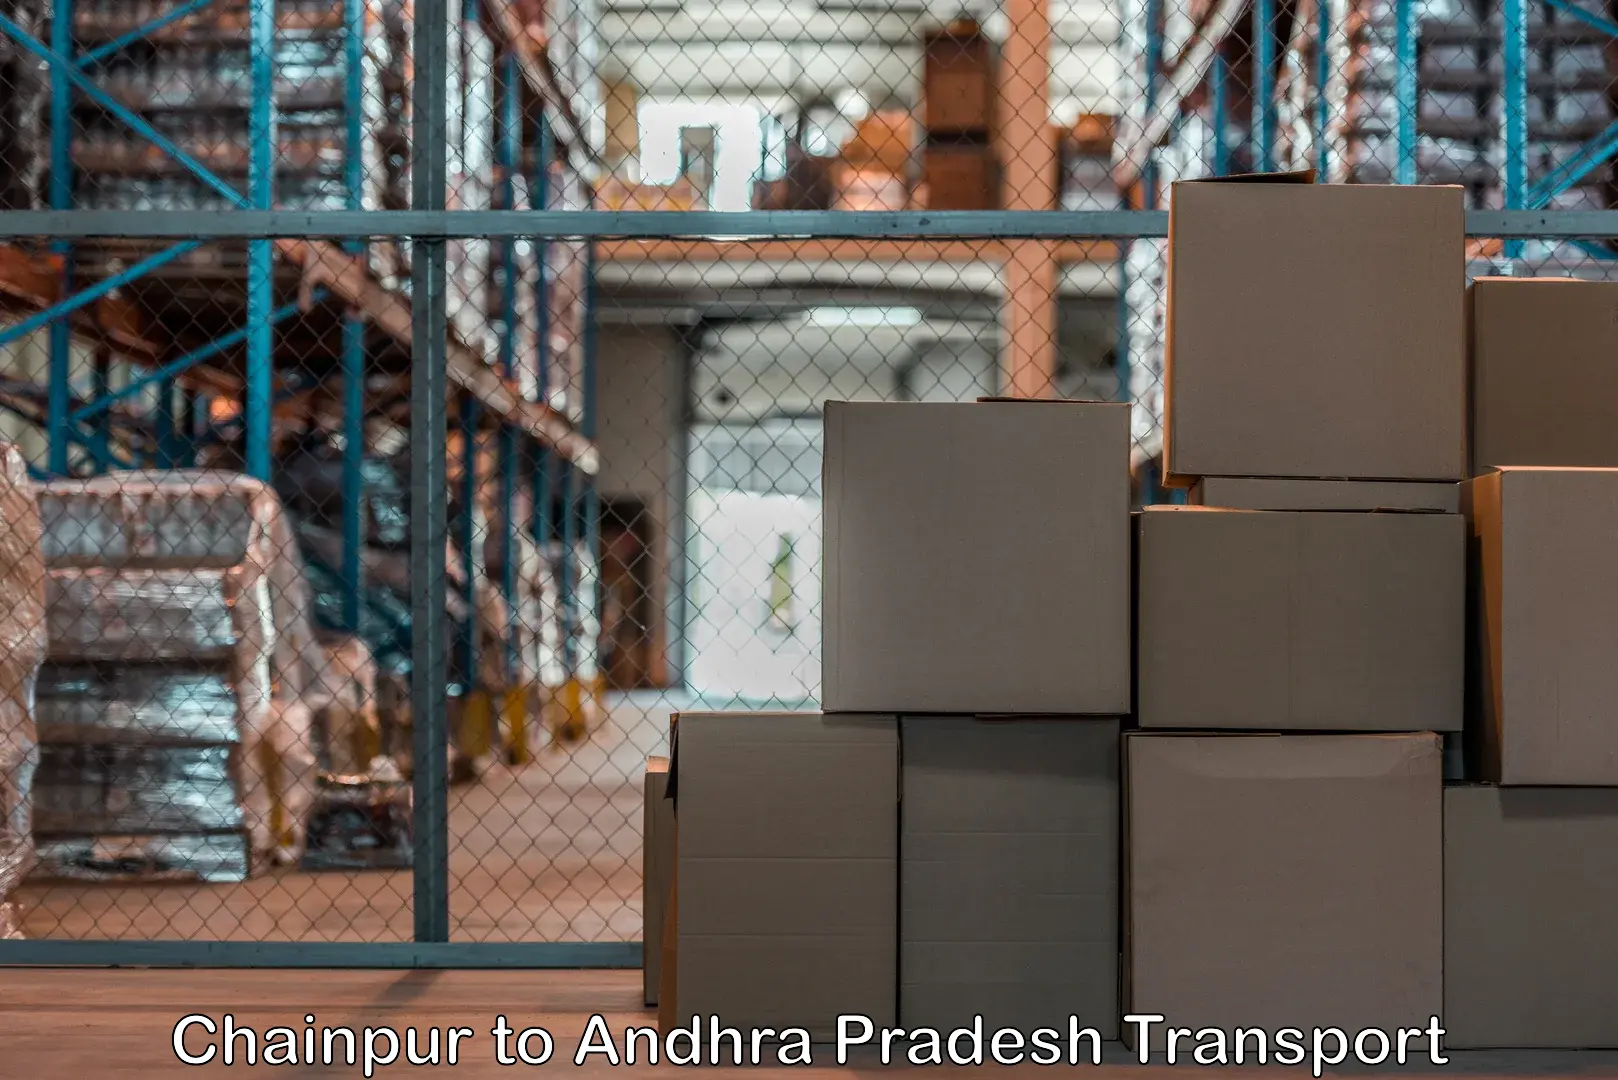 Domestic goods transportation services Chainpur to Ongole